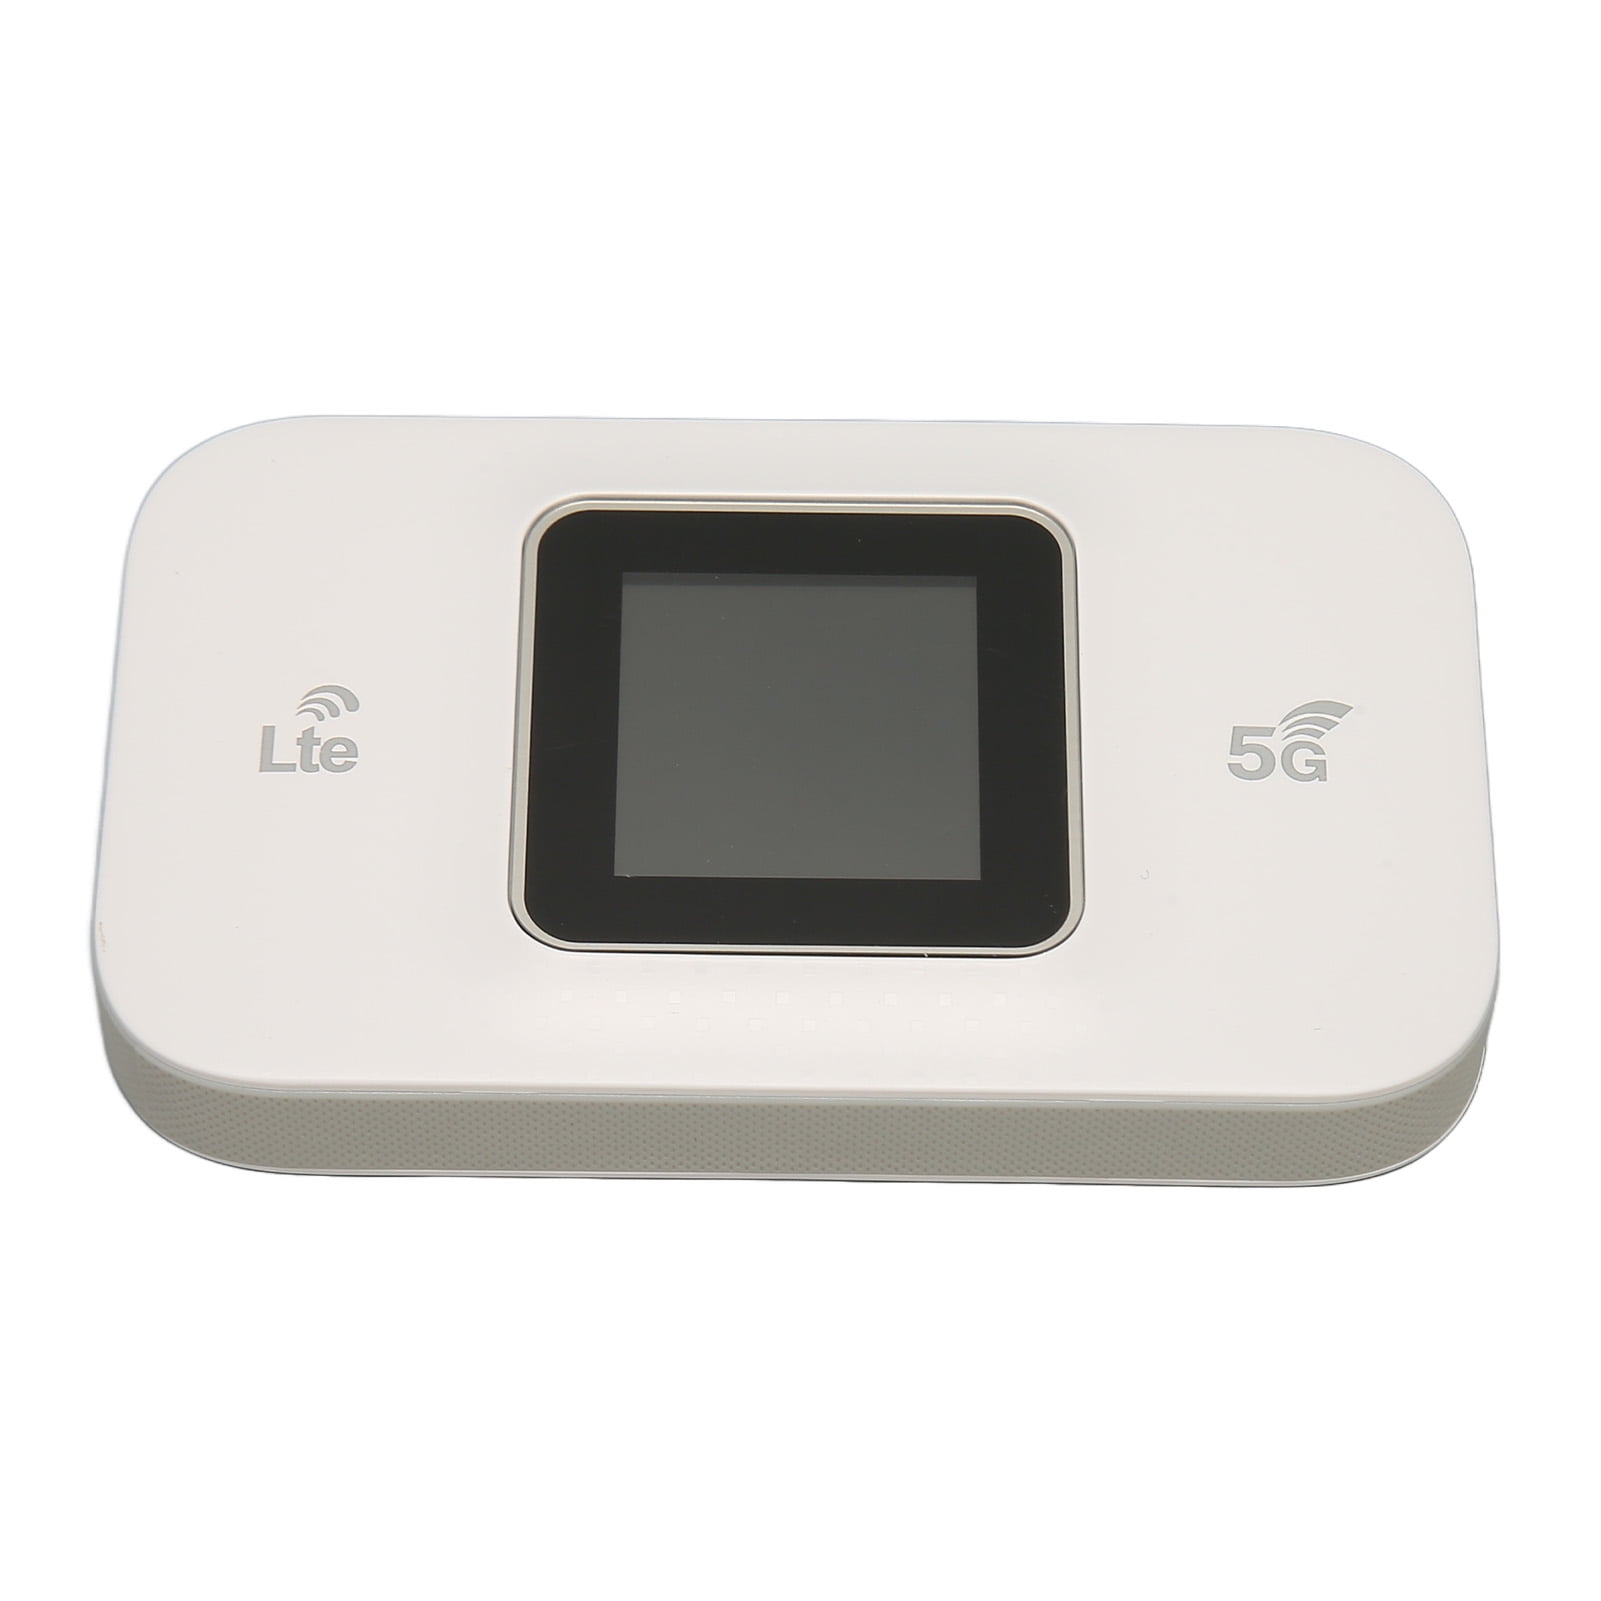 4G Mobile WiFi Hotspot Support 10 Devices Connection Mini LTE